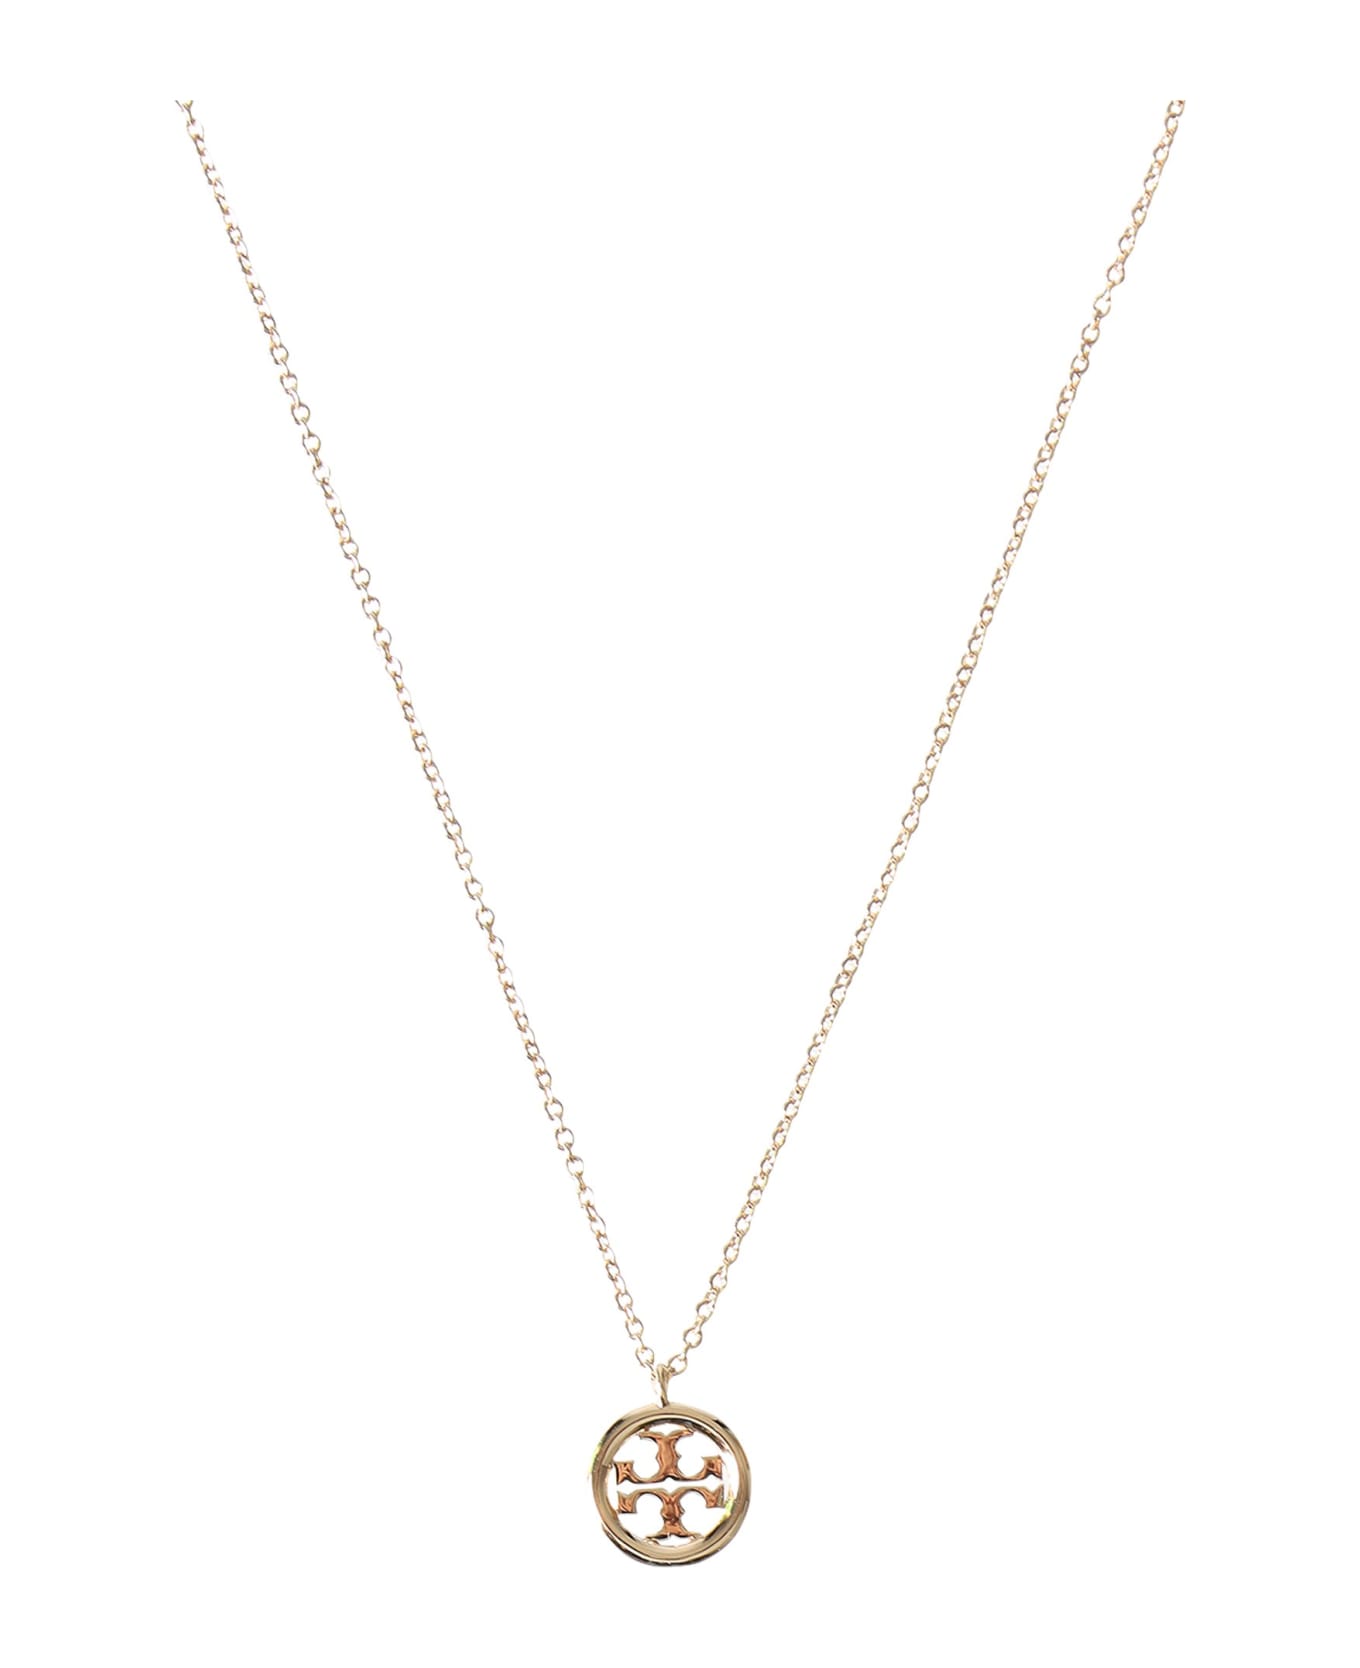 Tory Burch Miller Necklace - ORO ネックレス